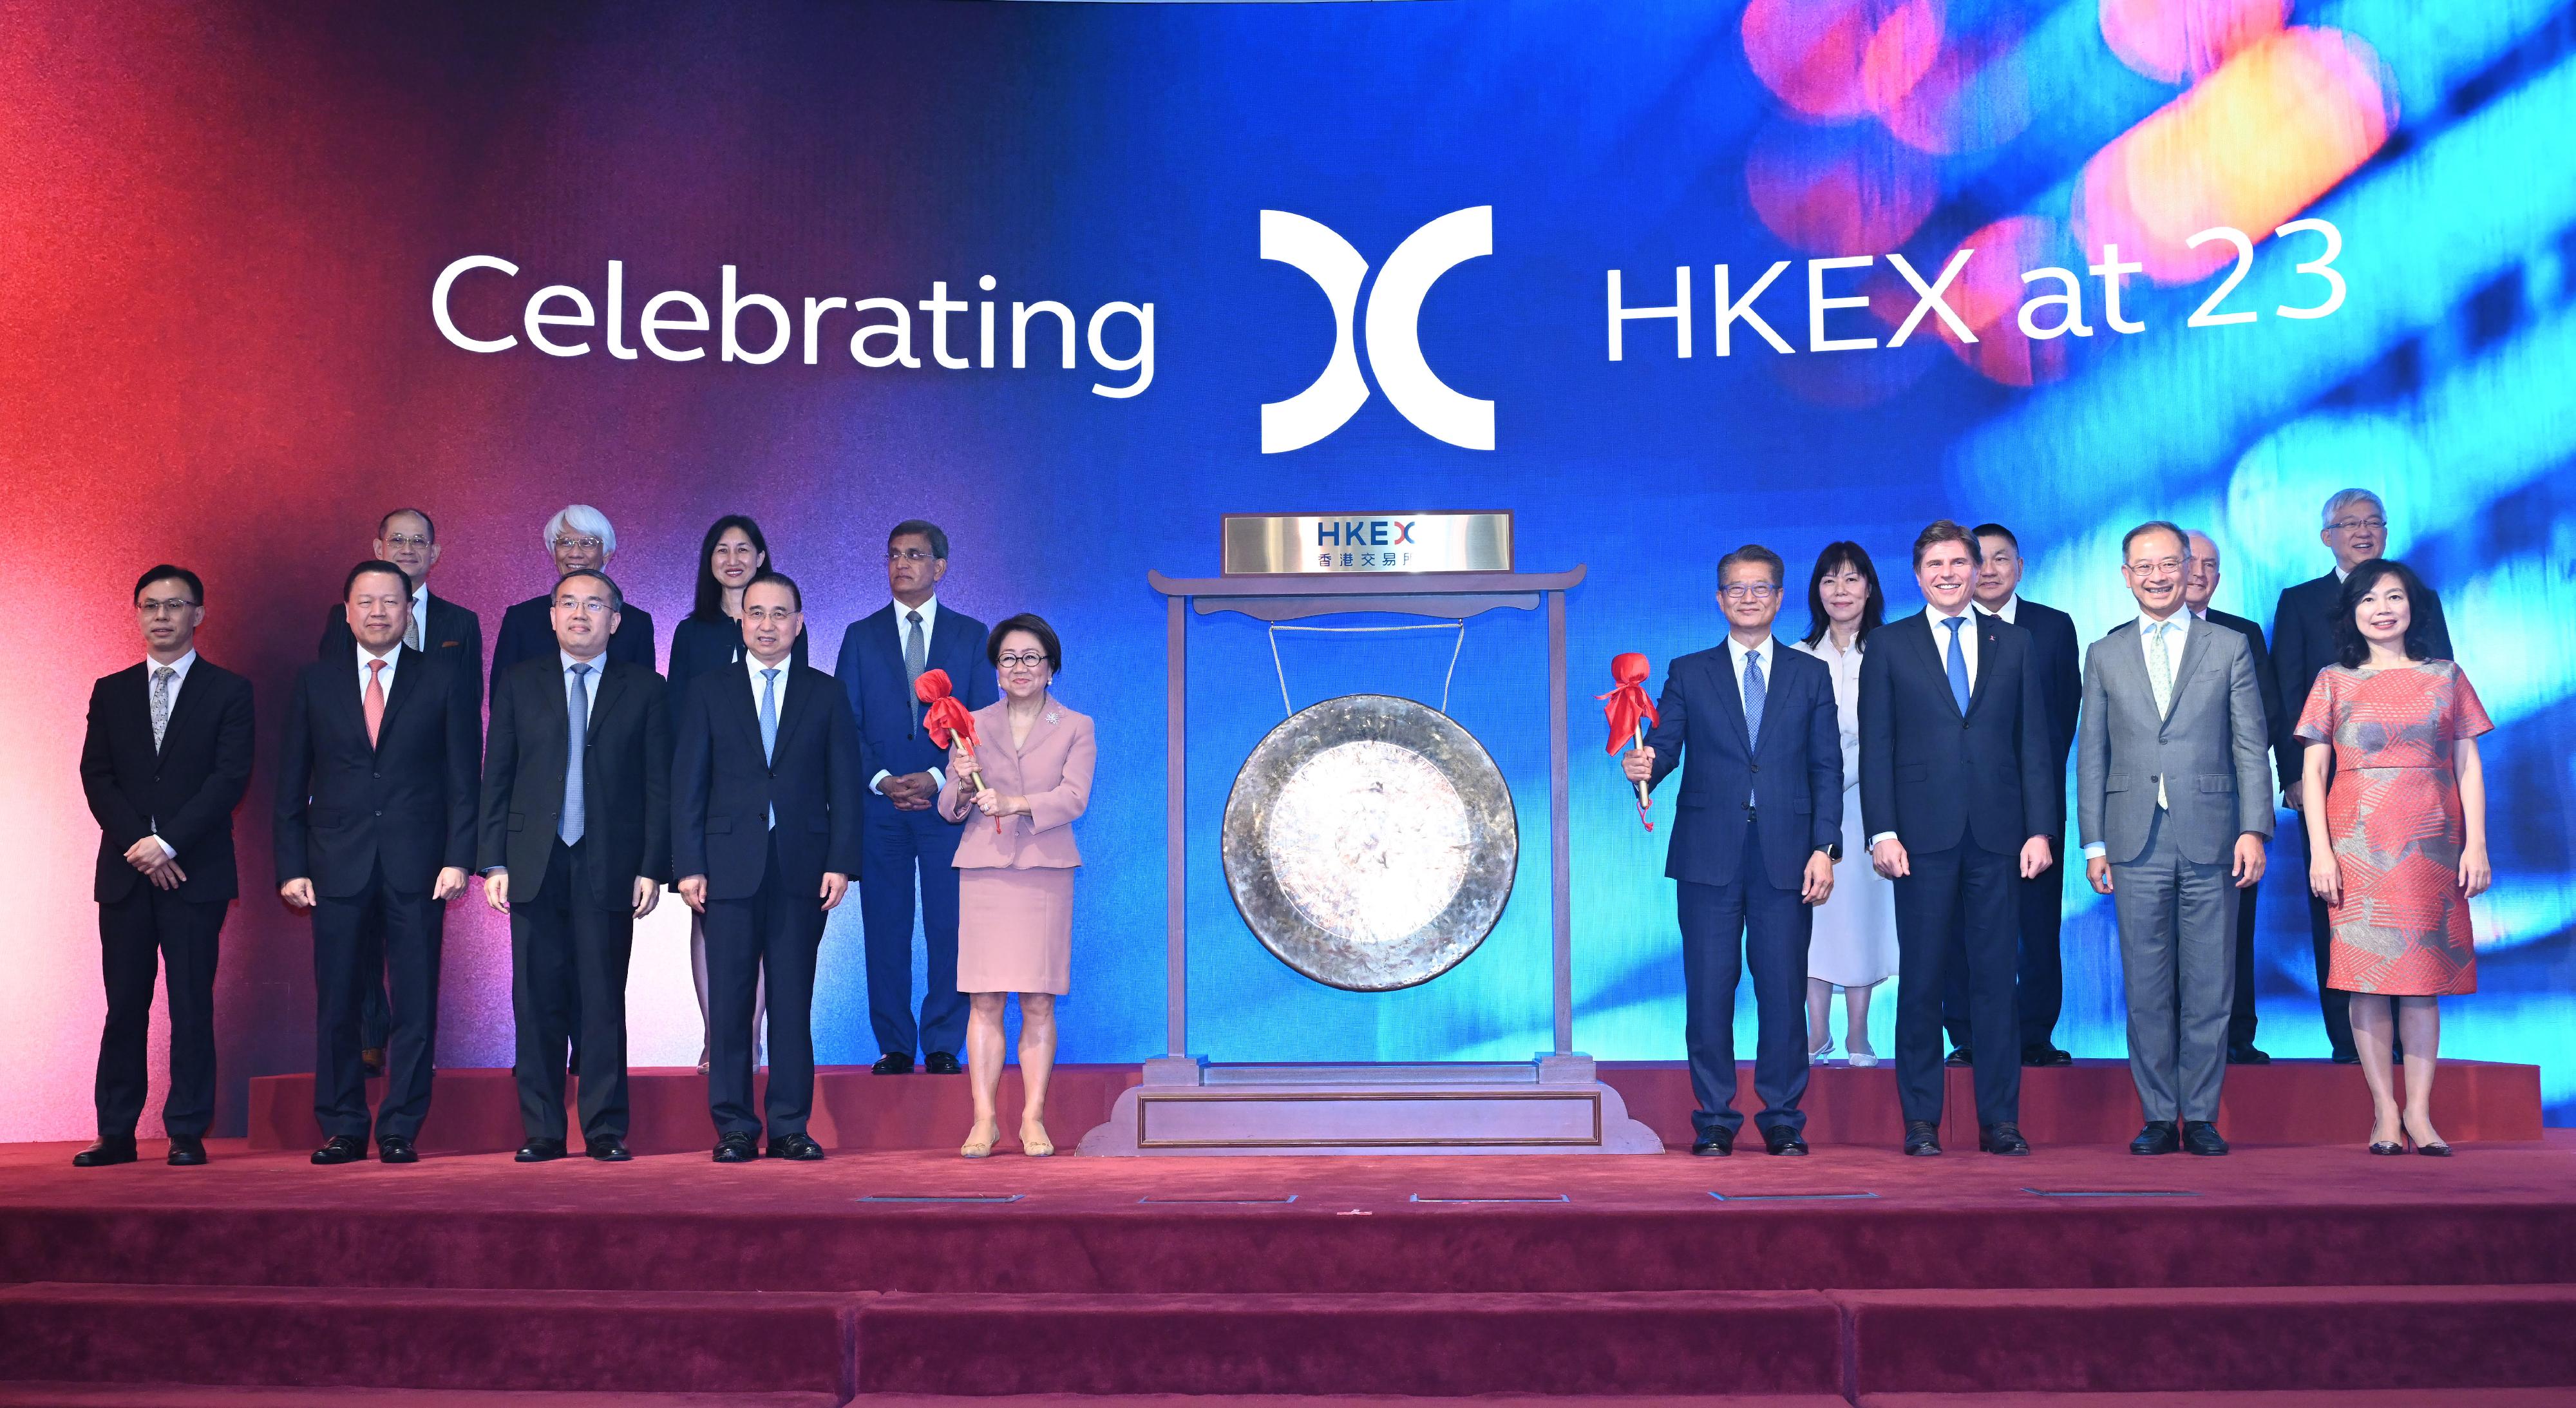 The Financial Secretary, Mr Paul Chan, attended the Hong Kong Exchanges and Clearing Limited (HKEX) 23rd Anniversary Celebrations today (June 14). Photo shows (front row, from left) the Acting Chief Executive Officer of the Securities and Futures Commission (SFC), Mr Rico Leung; the Chairman of the SFC, Mr Tim Lui; the Secretary for Financial Services and the Treasury, Mr Christopher Hui; the Commissioner of the Ministry of Foreign Affairs of the People's Republic of China in the Hong Kong Special Administrative Region, Mr Liu Guangyuan; the Chairman of the HKEX, Mrs Laura Cha; Mr Chan; the Chief Executive Officer of the HKEX, Mr Nicolas Aguzin; the Chief Executive of the Hong Kong Monetary Authority, Mr Eddie Yue; the Permanent Secretary for Financial Services and the Treasury (Financial Services), Ms Salina Yan, and other guests at the ceremony.